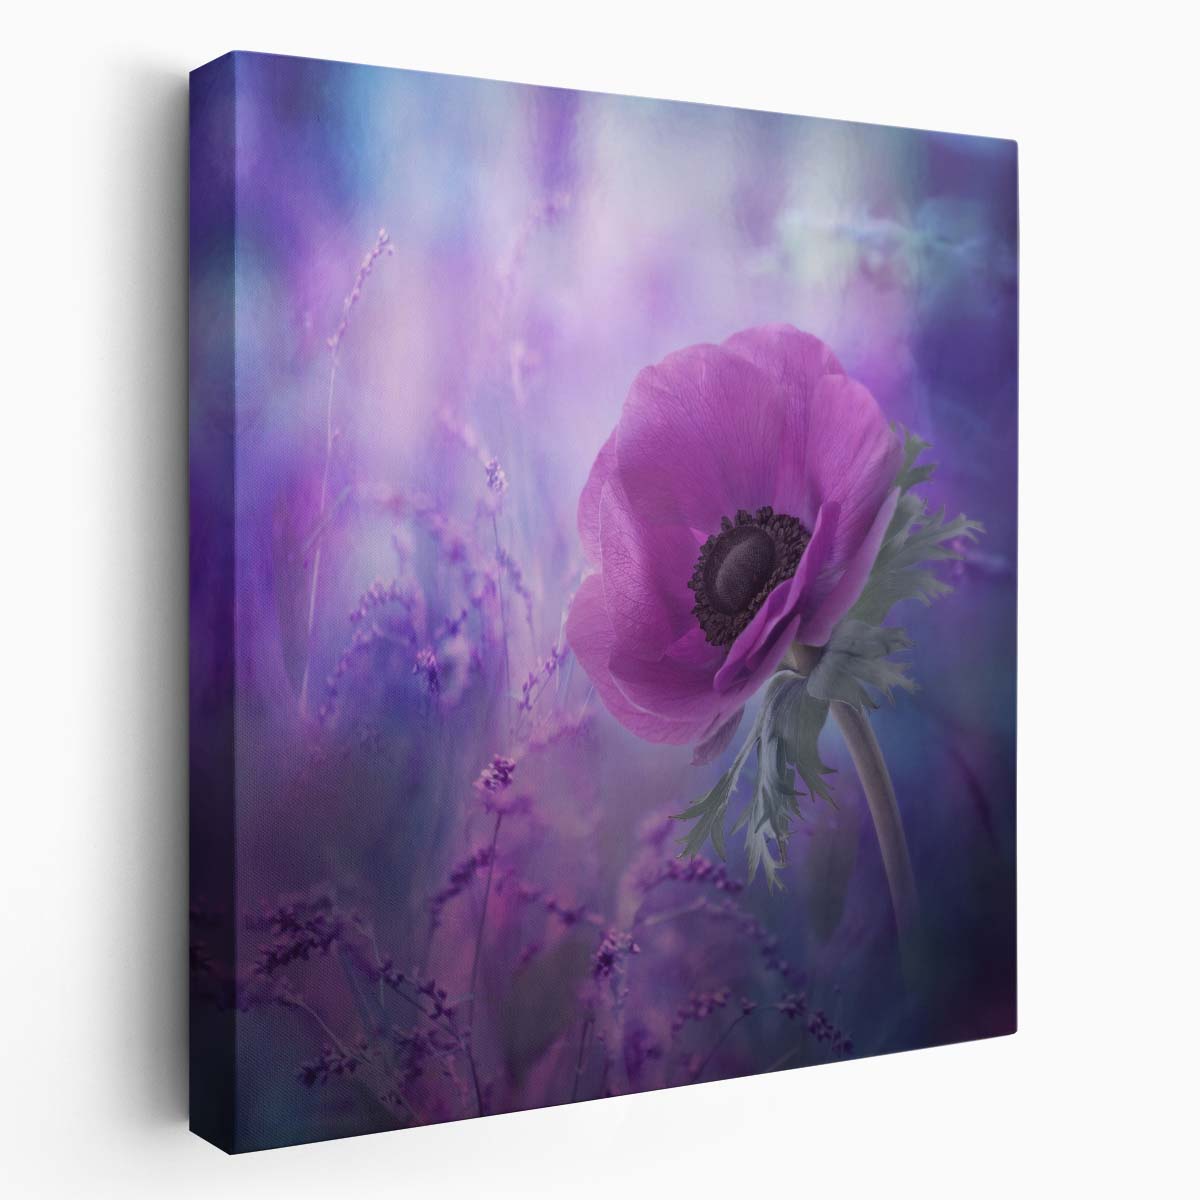 Soft Floral Ecstasy Purple Poppy Garden Photography Wall Art by Luxuriance Designs. Made in USA.